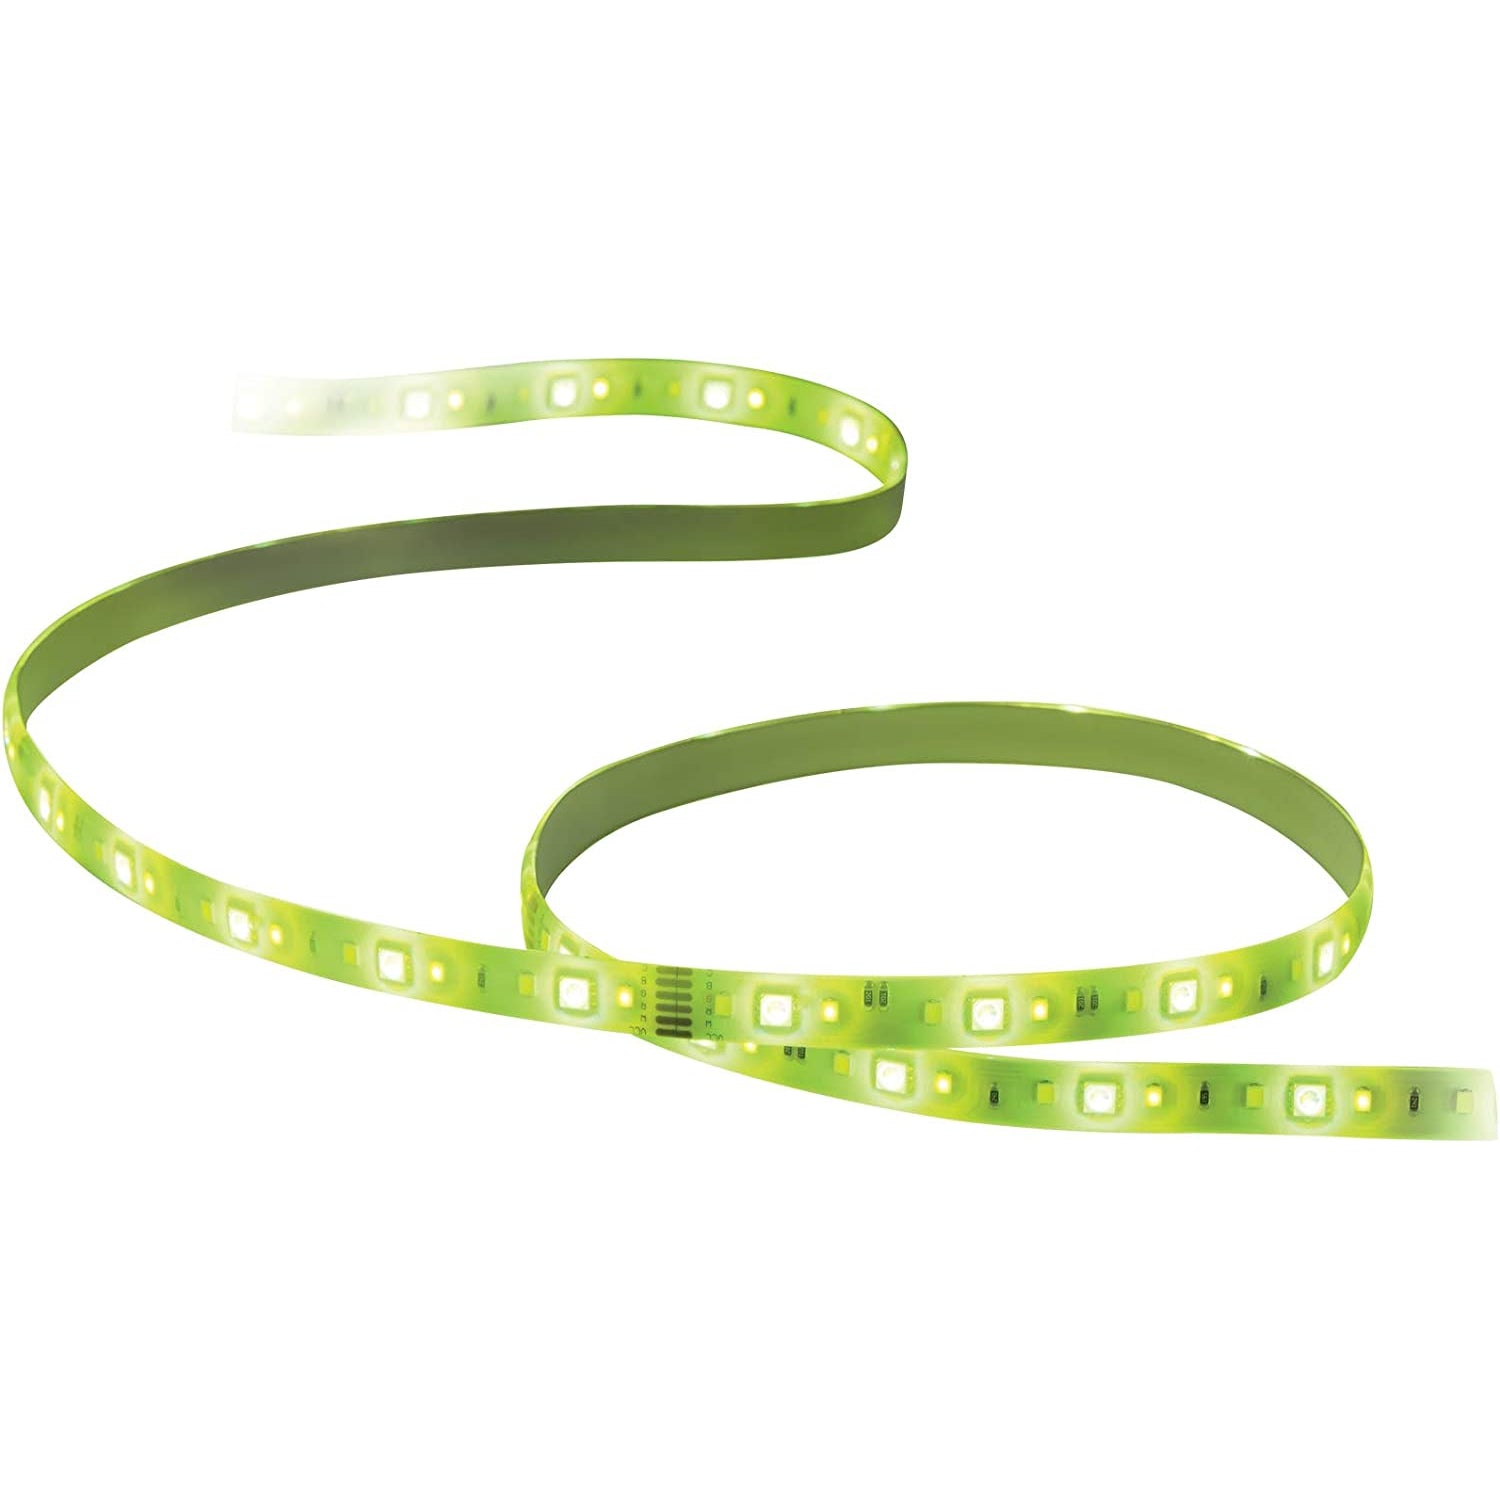 Wiz Wi-Fi Colour & Tunable White Smart Lightstrip - 2M - Refurbished Excellent